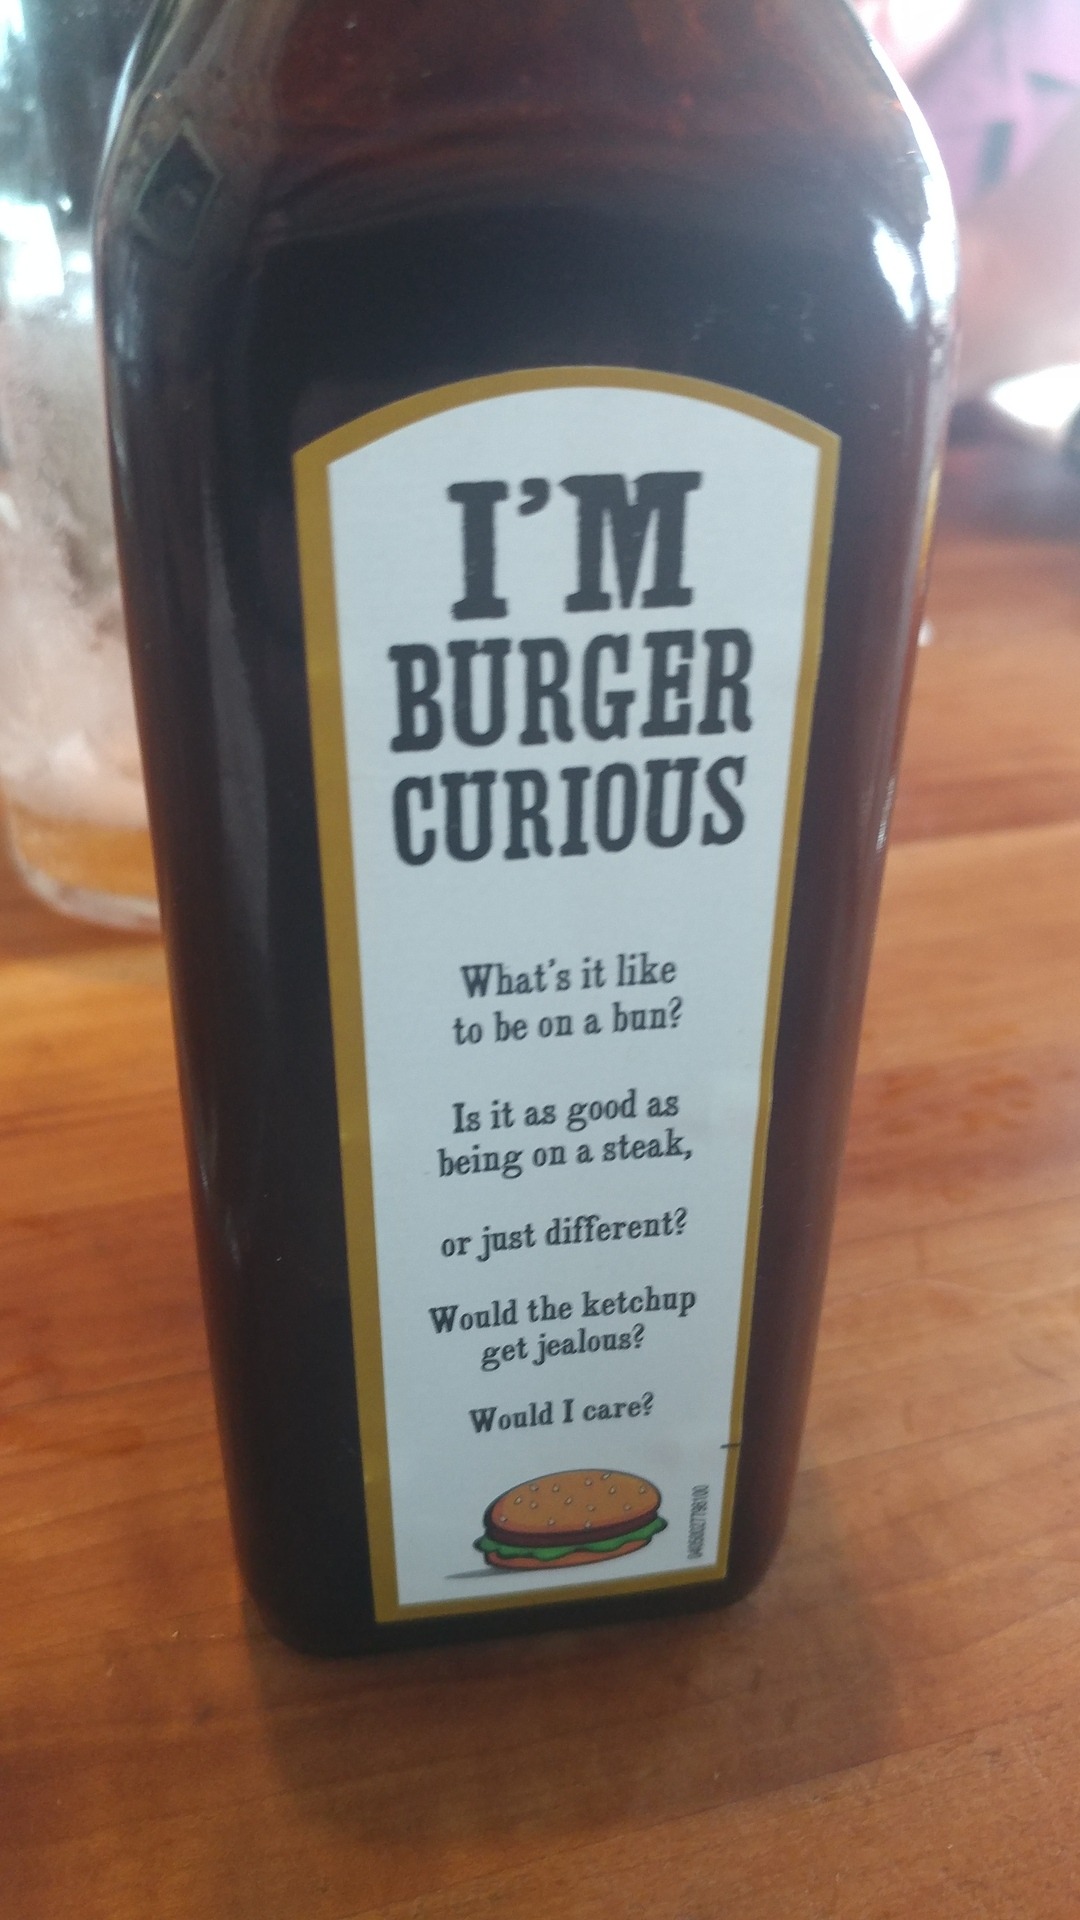 You guys ever seen bi curious A1 steak sauce? Would&rsquo;ve been the perfect